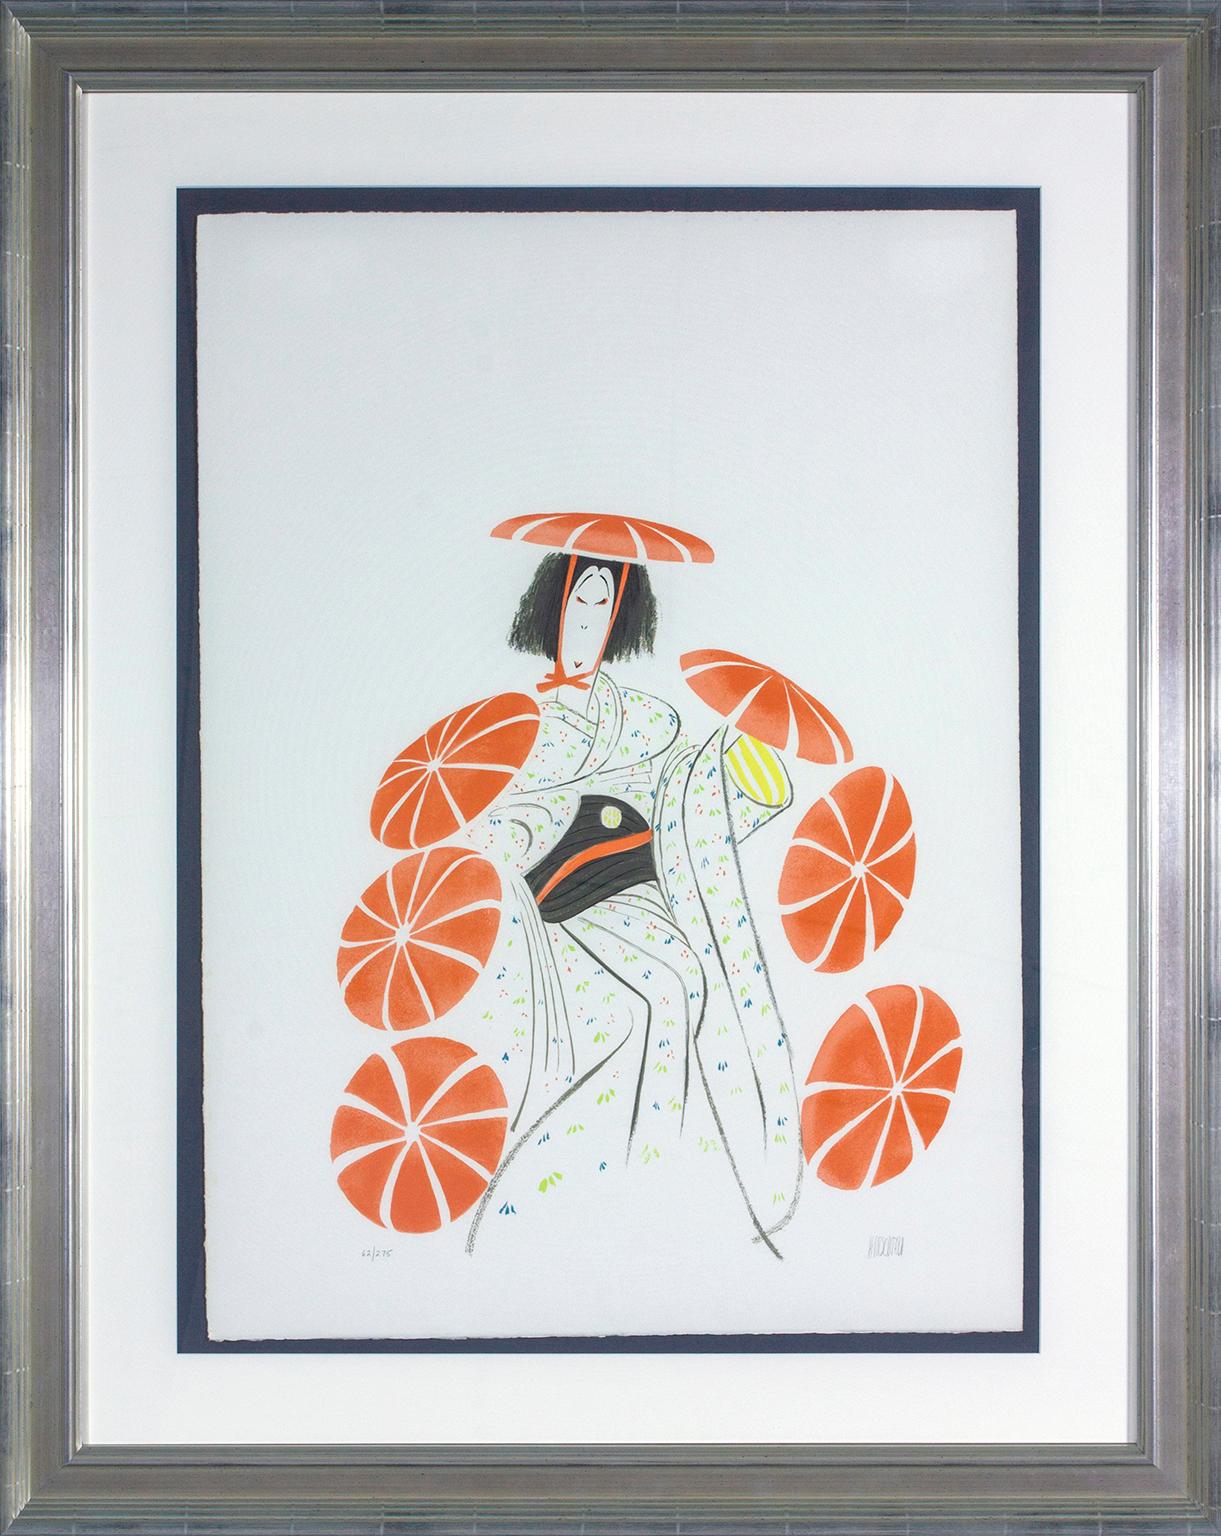 Albert Al Hirschfeld Figurative Print - "Musume" framed, hand-signed lithograph from "Kabuki Suite" by Al Hirschfeld